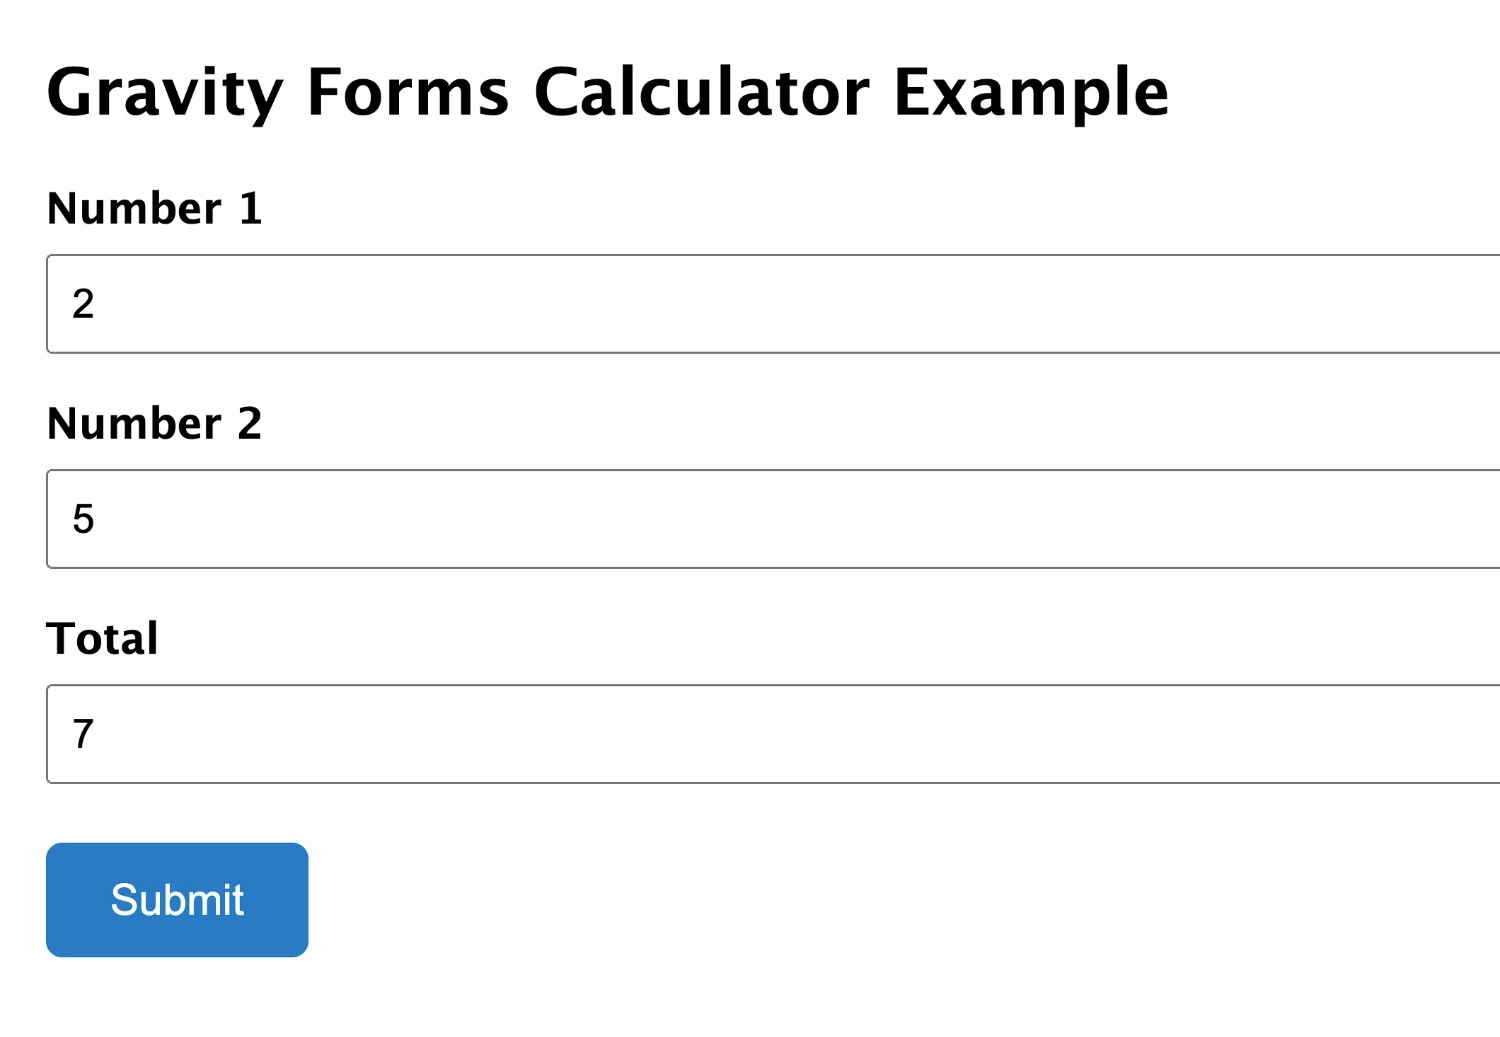 Gravity Forms calculations example